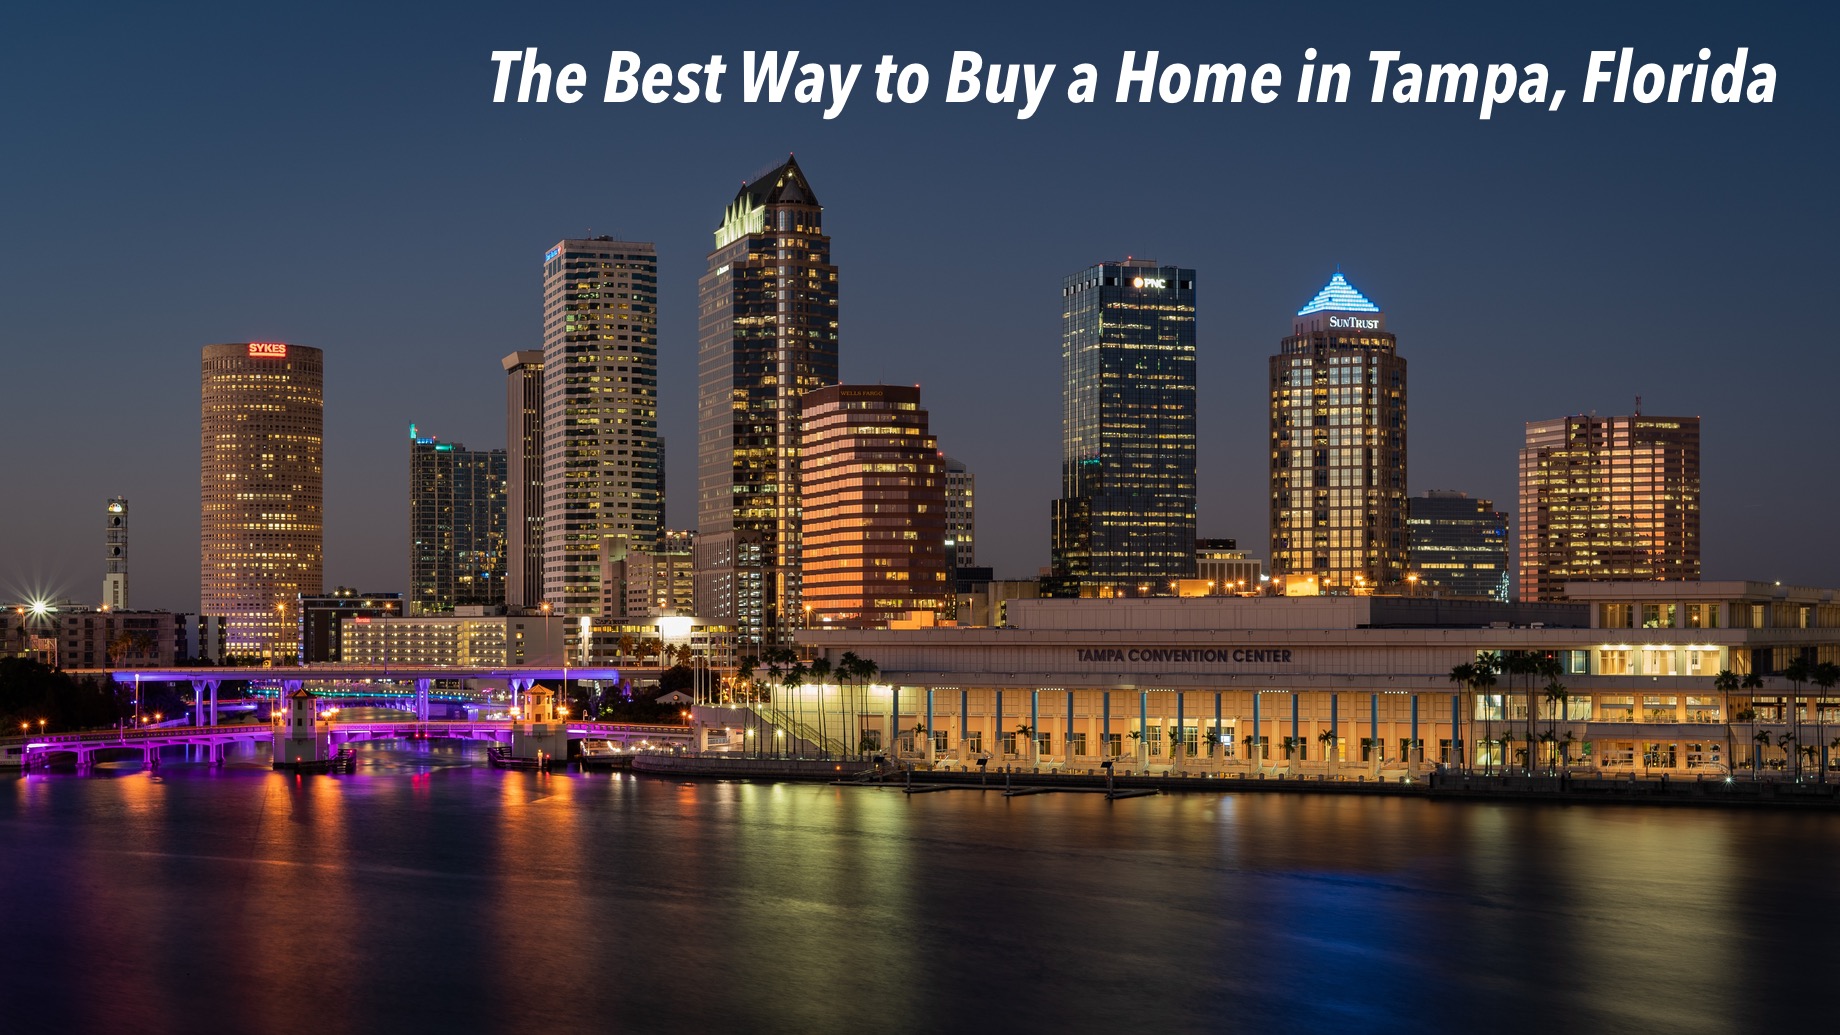 The Best Way to Buy a Home in Tampa, Florida